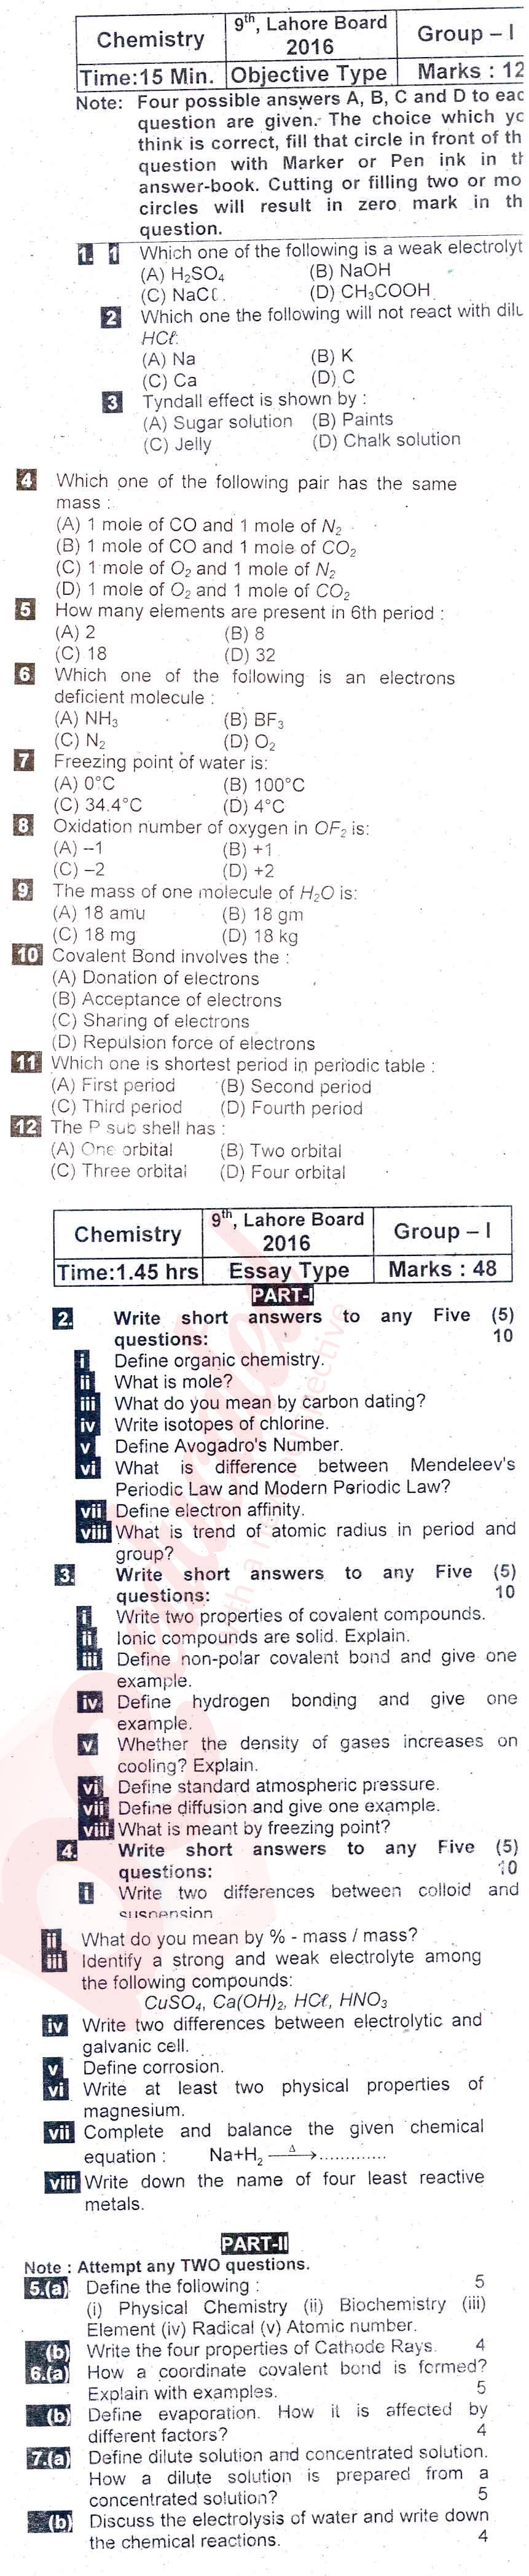 Chemistry 9th English Medium Past Paper Group 1 BISE Lahore 2016